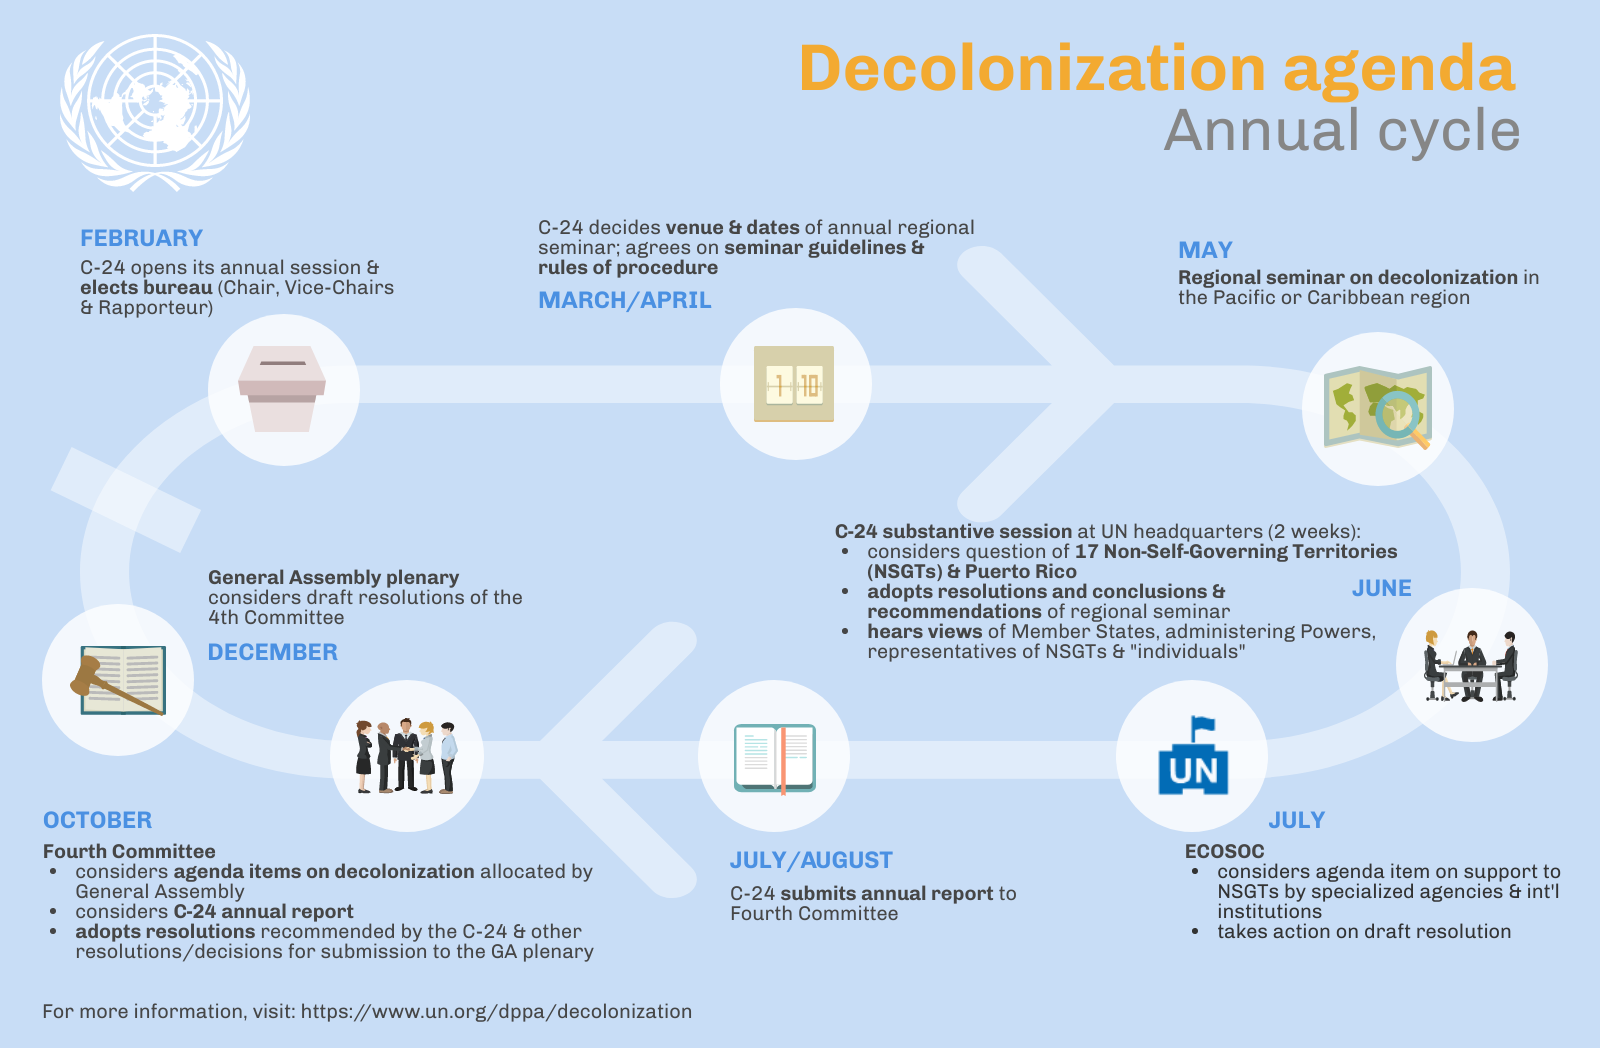 About | The United Nations and Decolonization